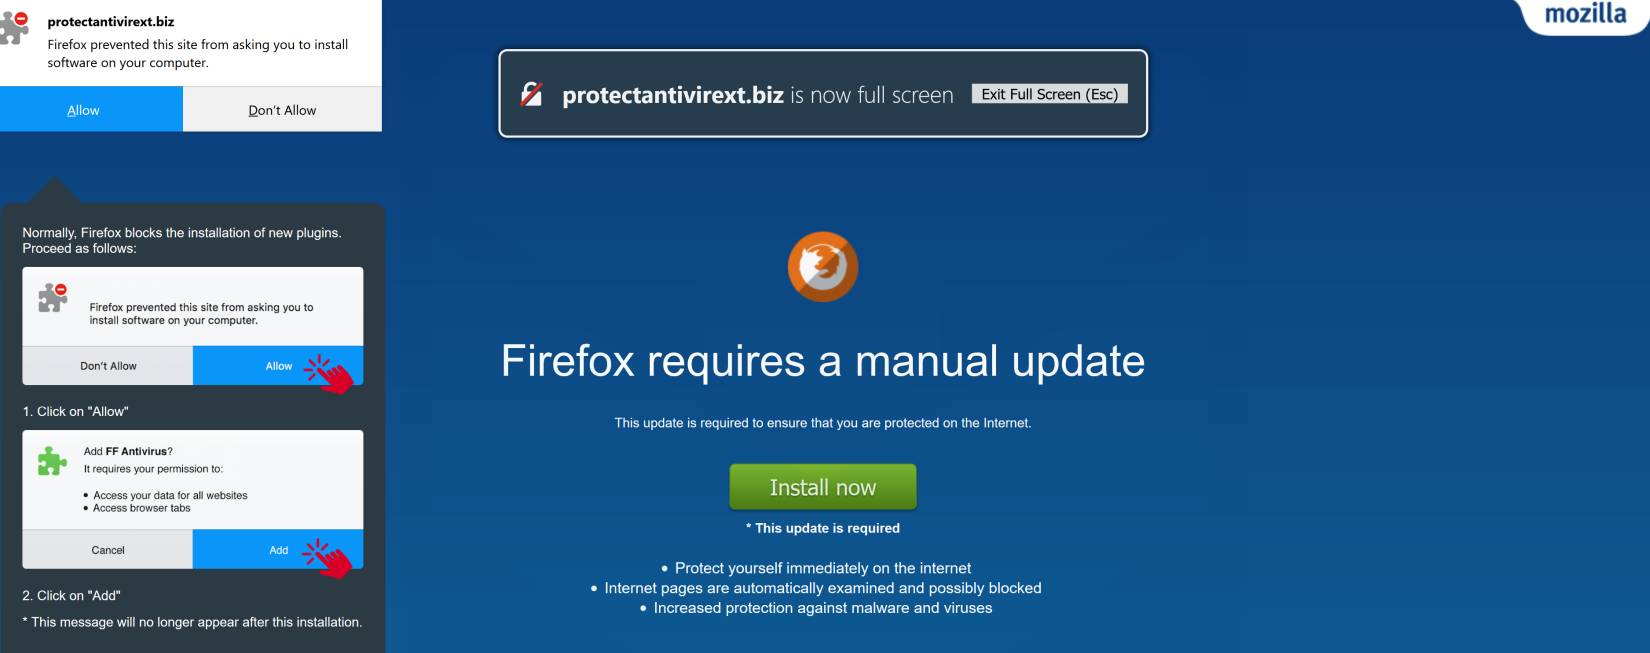 firefox requires a manual update